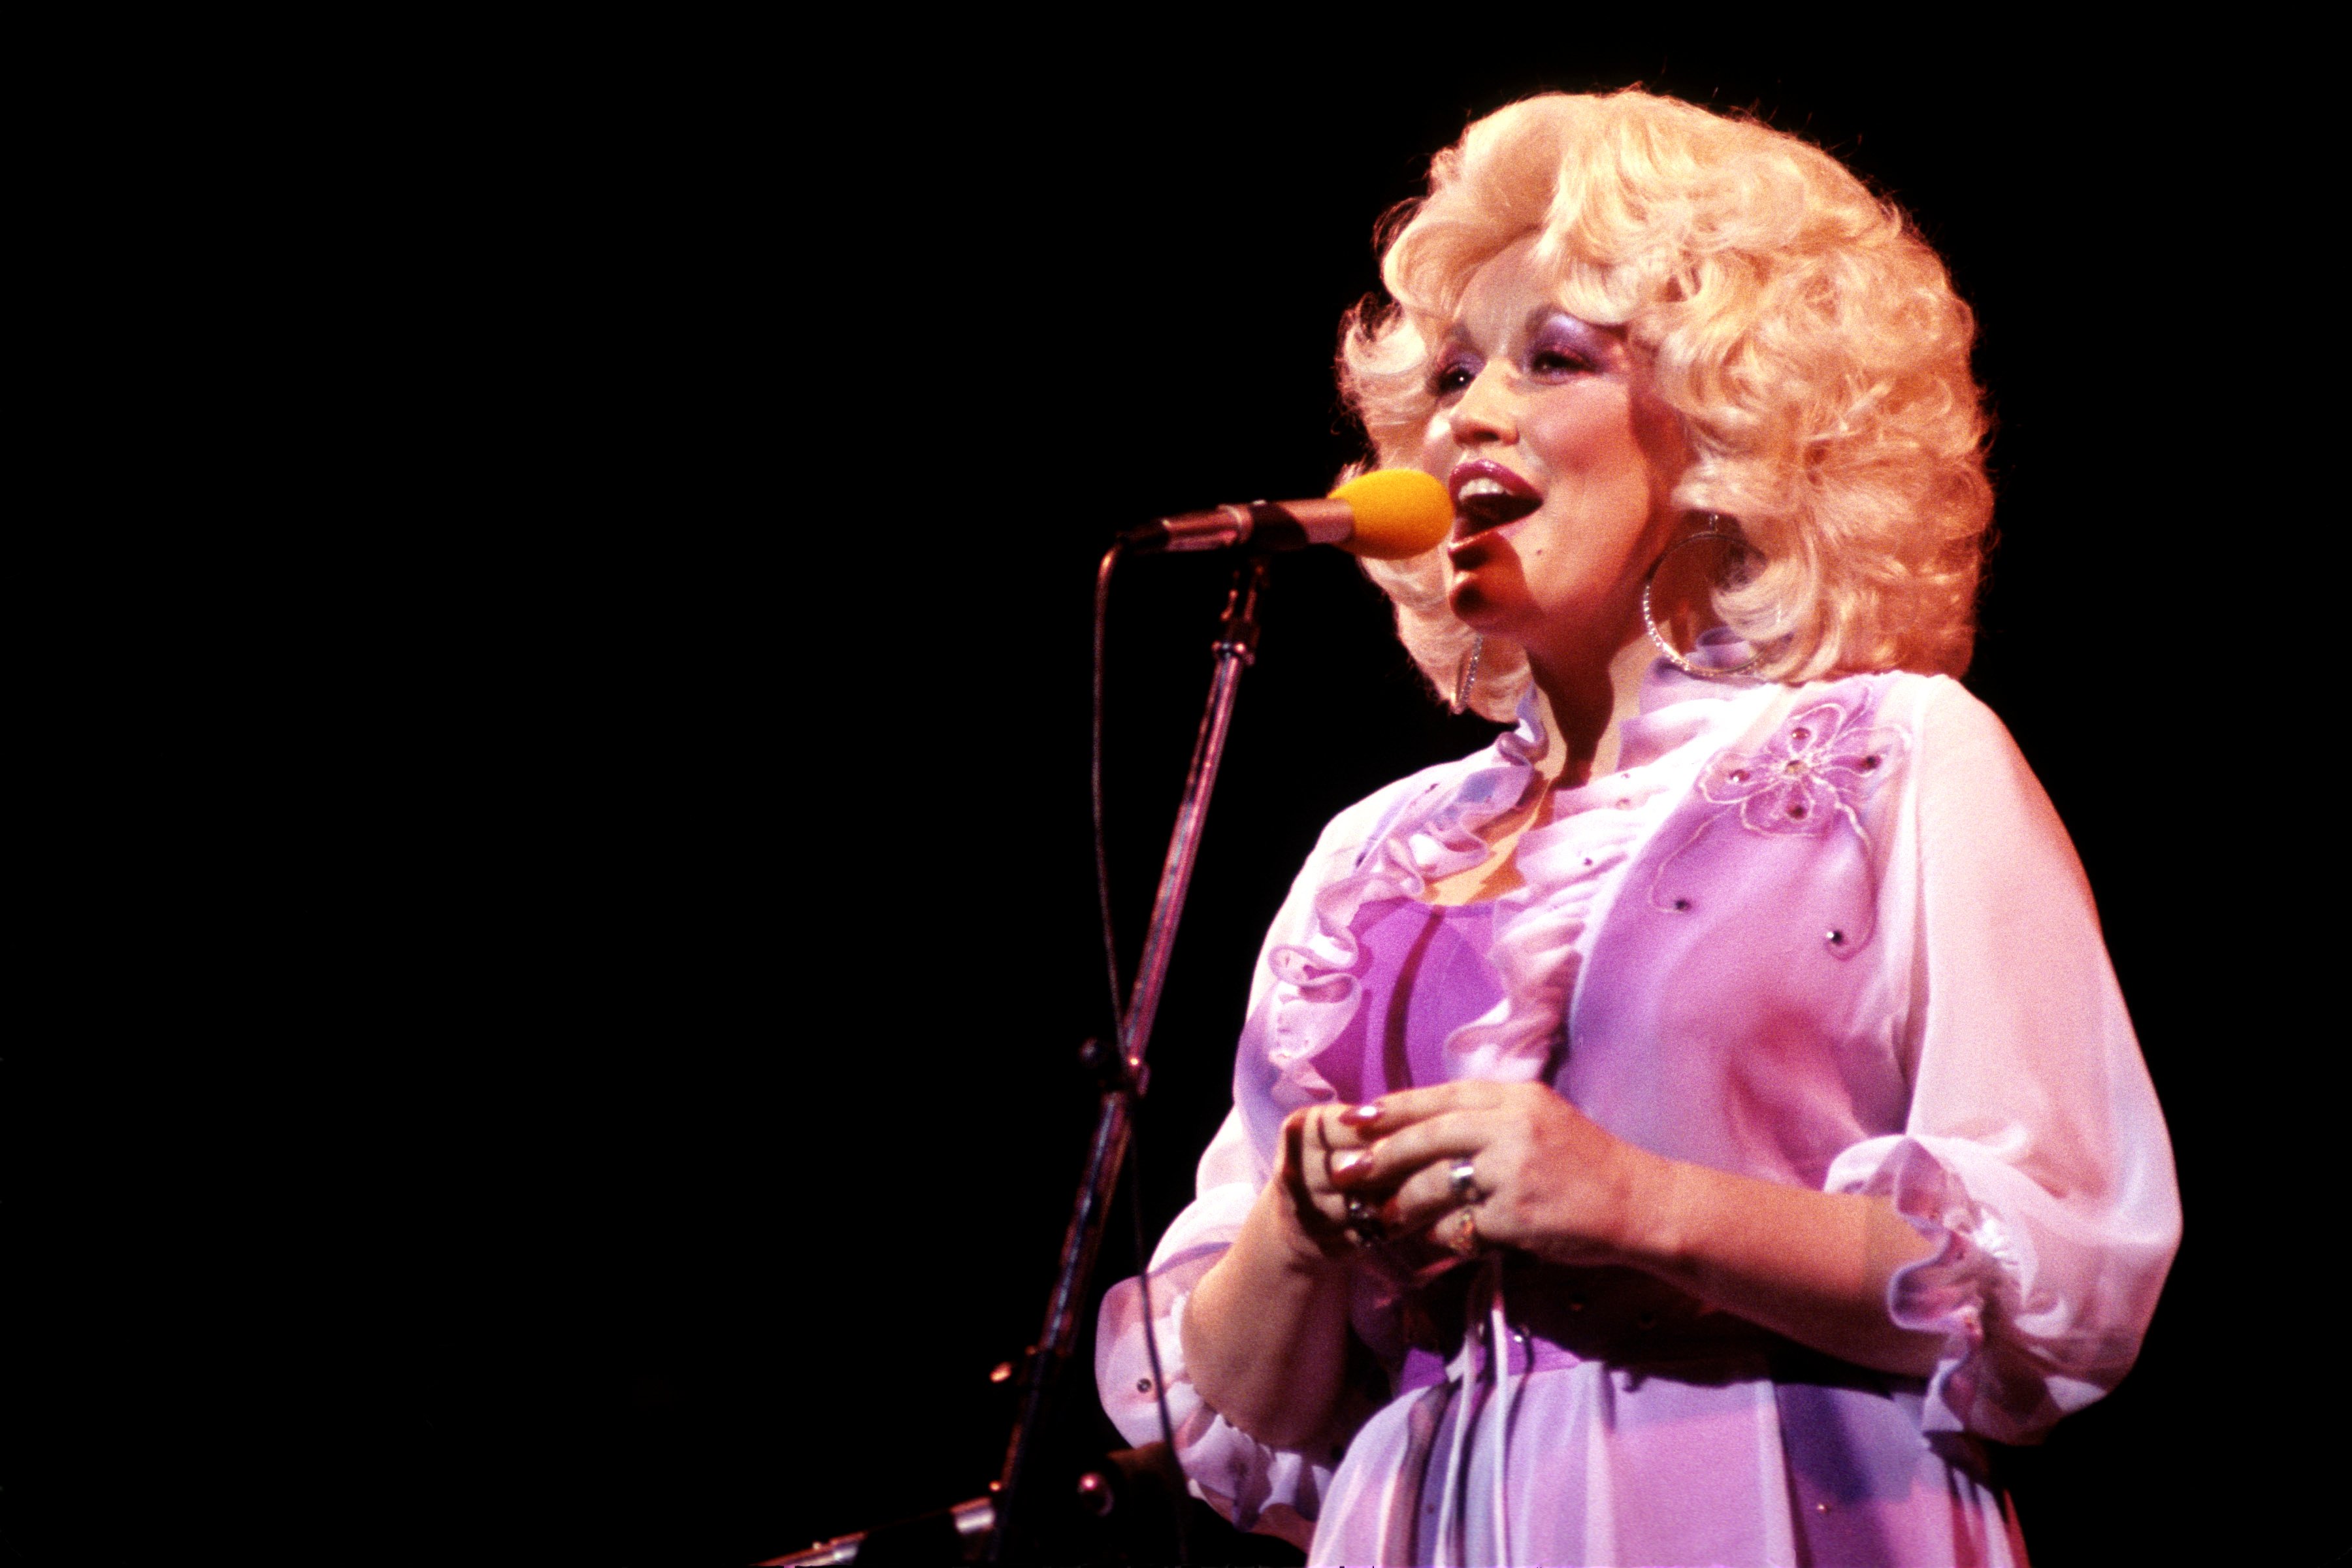 Dolly Parton Wrote ‘Just the Way I Am’ in the Late 1960s, and It Perfectly Portrays Who She’s Always Been